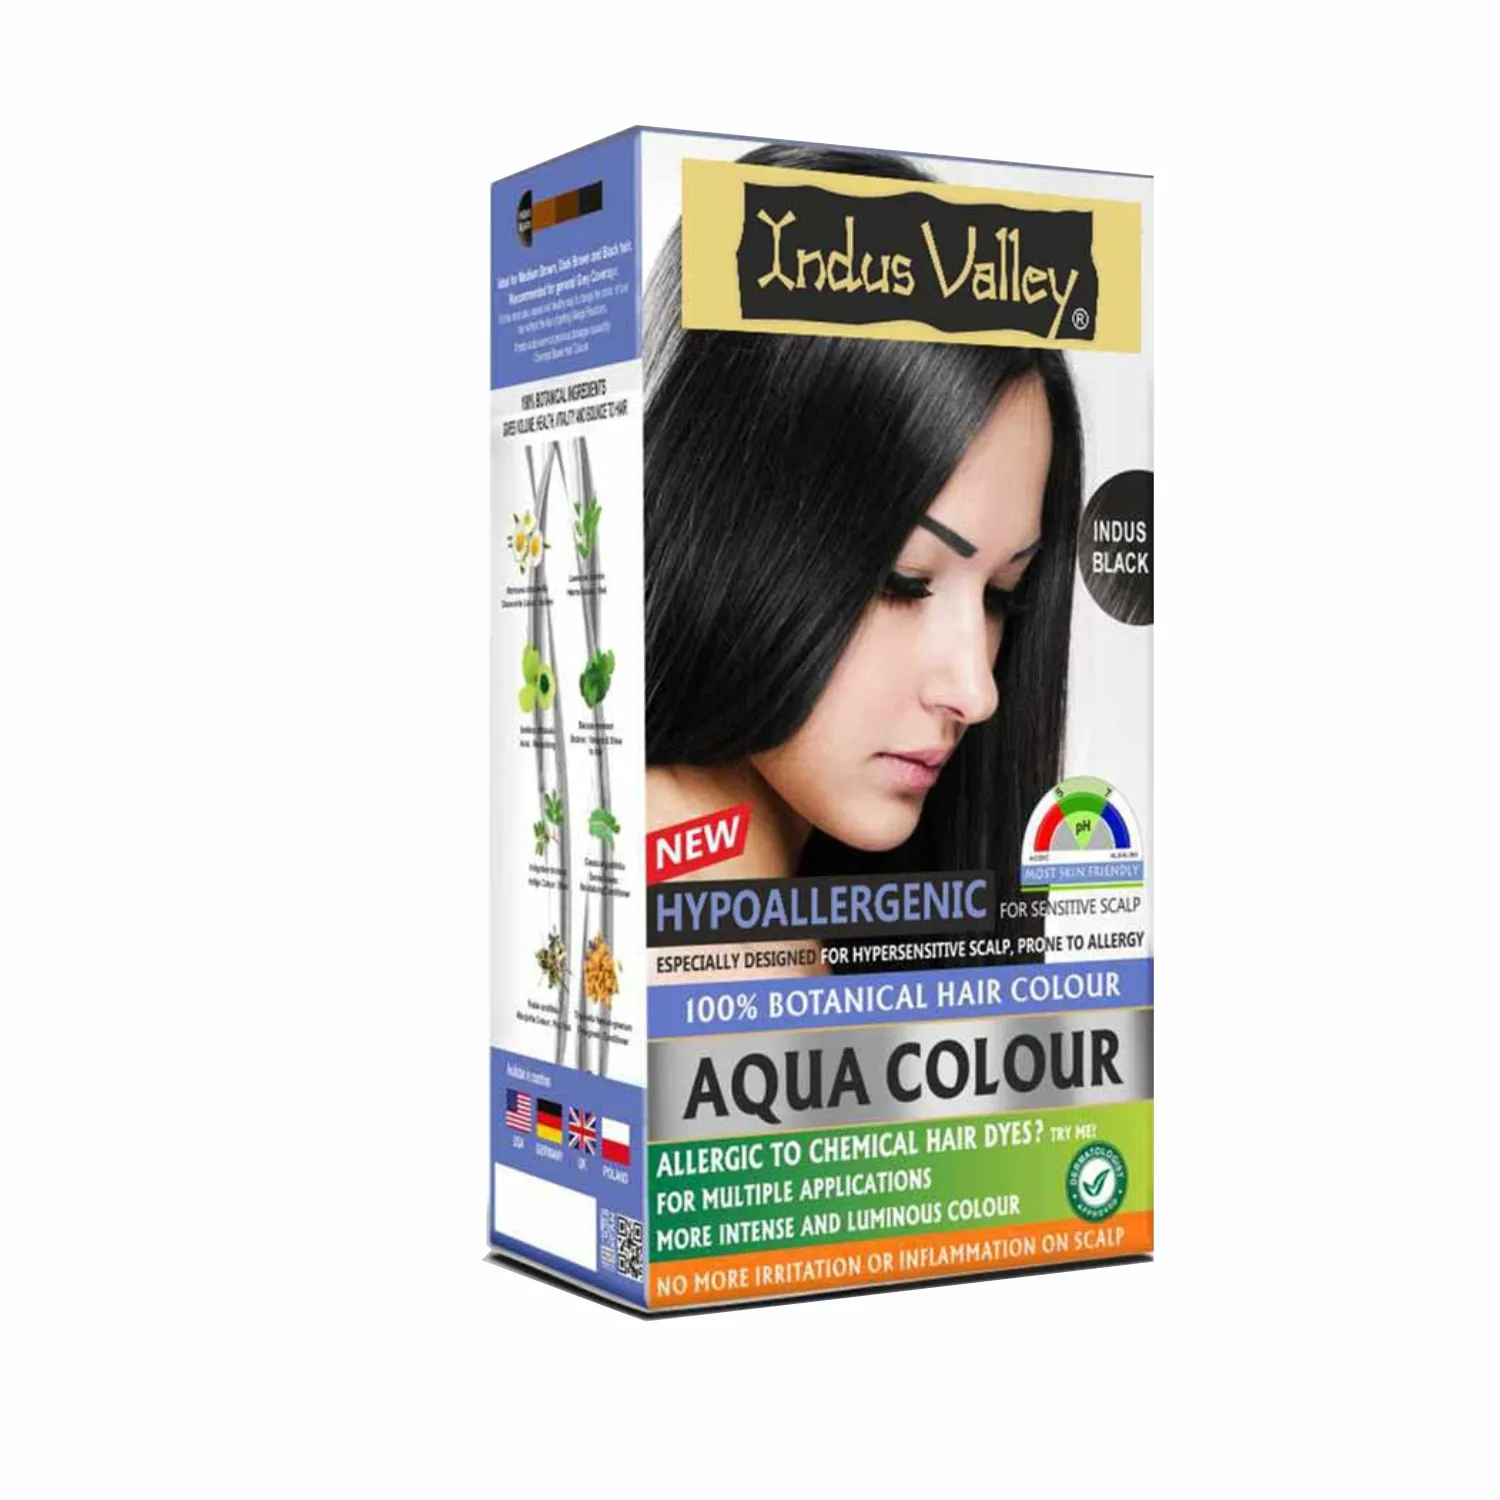 Indus Valley Aqua Hair Color Indus Black Gray Coverage Hair Dye Allergy Free Organic Hair Color OEM private label